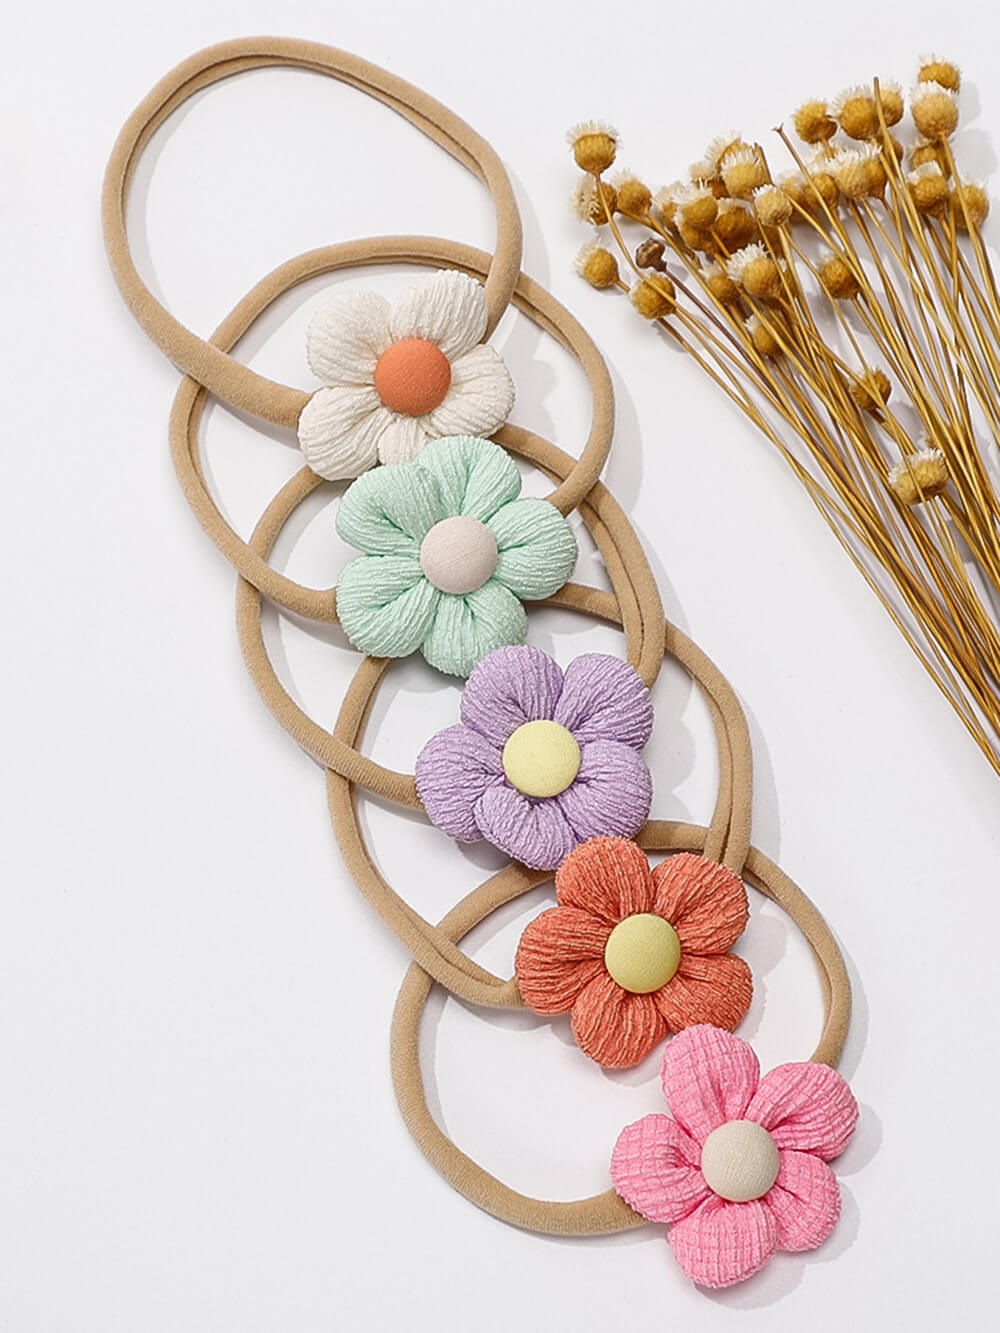 Tropical Blossom Candy Color Hair Tie